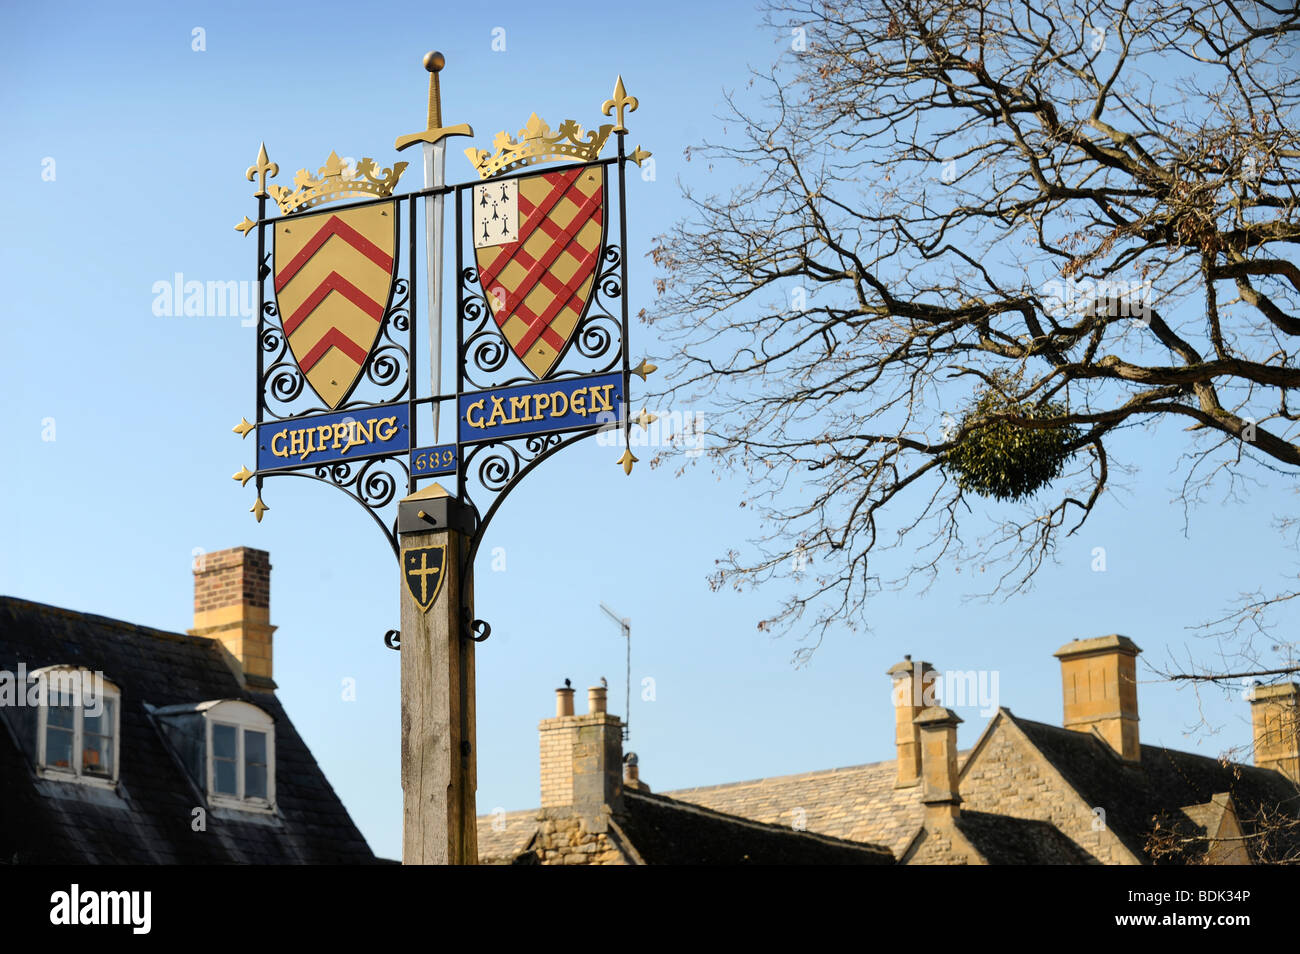 THE TOWNS SIGN WITH COAT OF ARMS NEAR THE MARKET PLACE IN CHIPPING CAMPDEN GLOUCESTERSHIRE UK Stock Photo